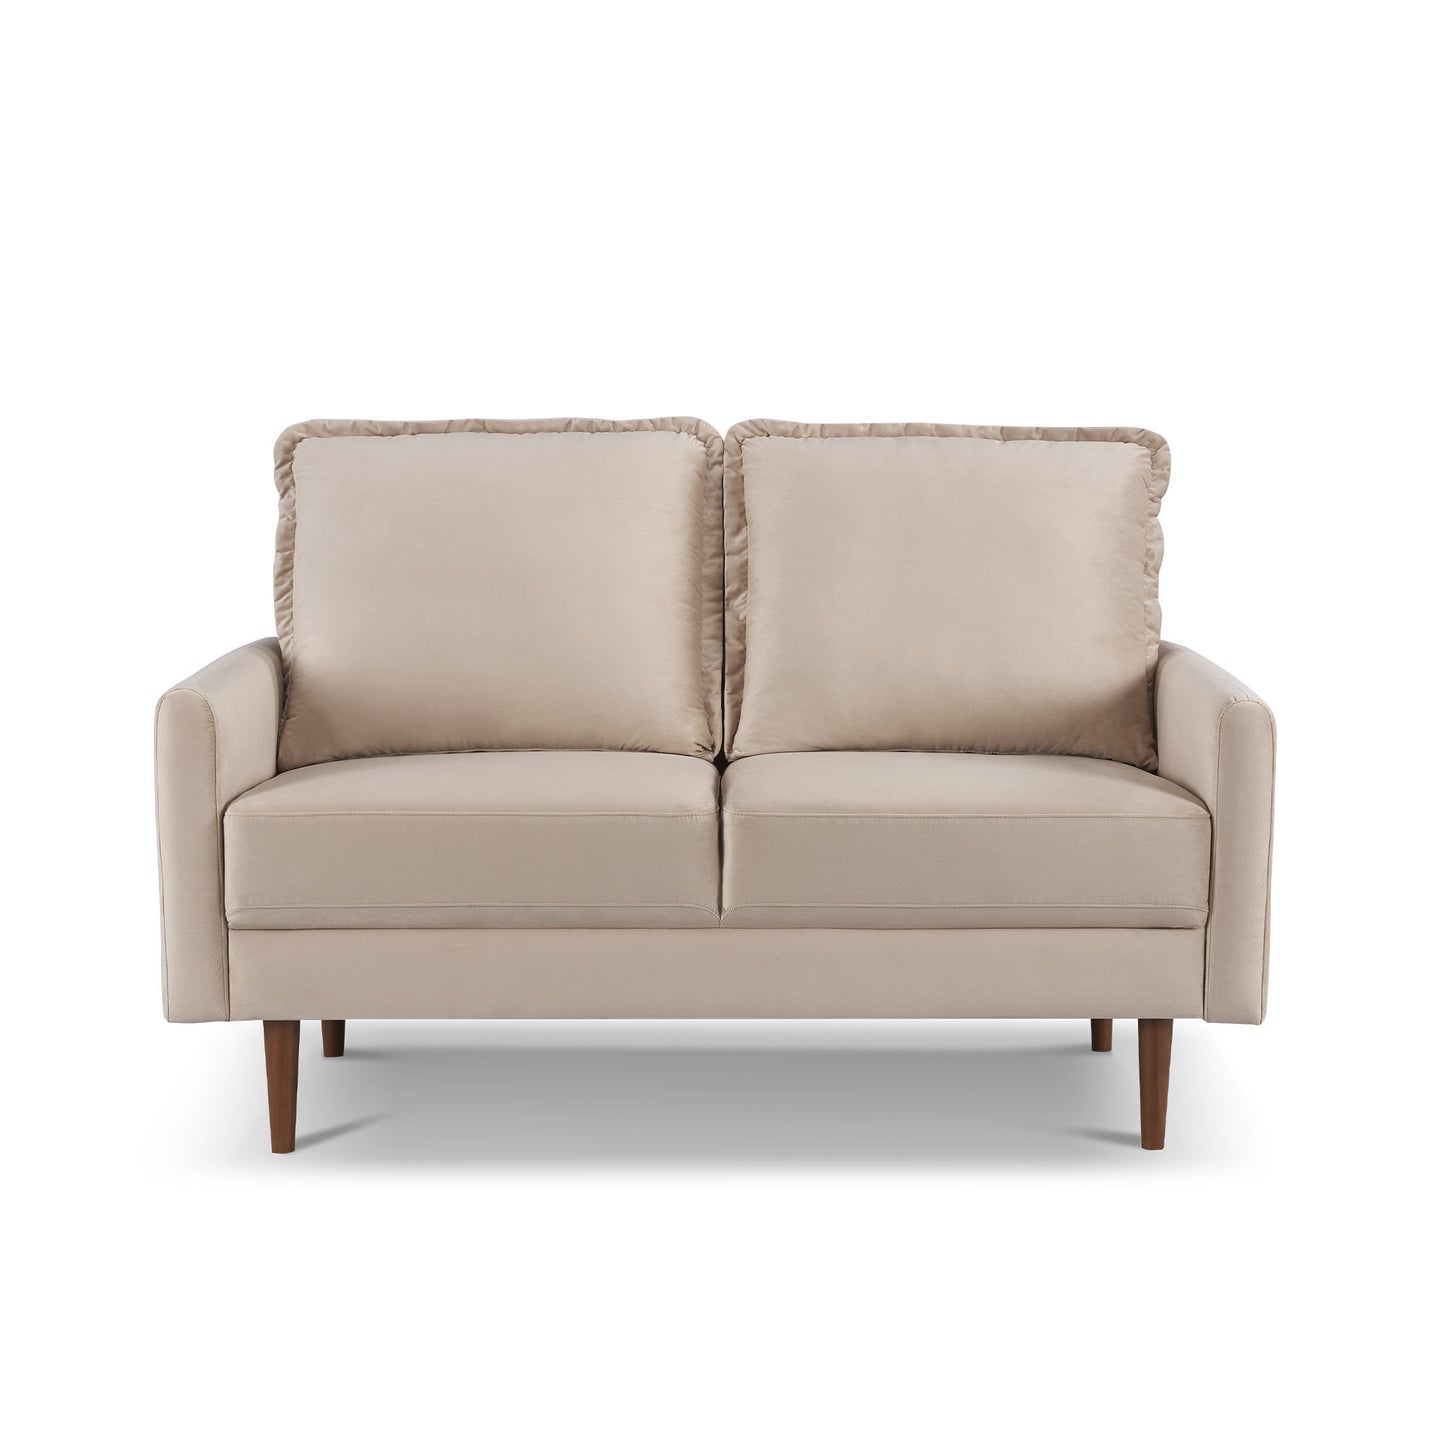 57.1 Inches Upholstered Velvet Sofa Couch, Modern Craftsmanship Seat with 3-Seater Cushions & Track Square Armrest - Beige